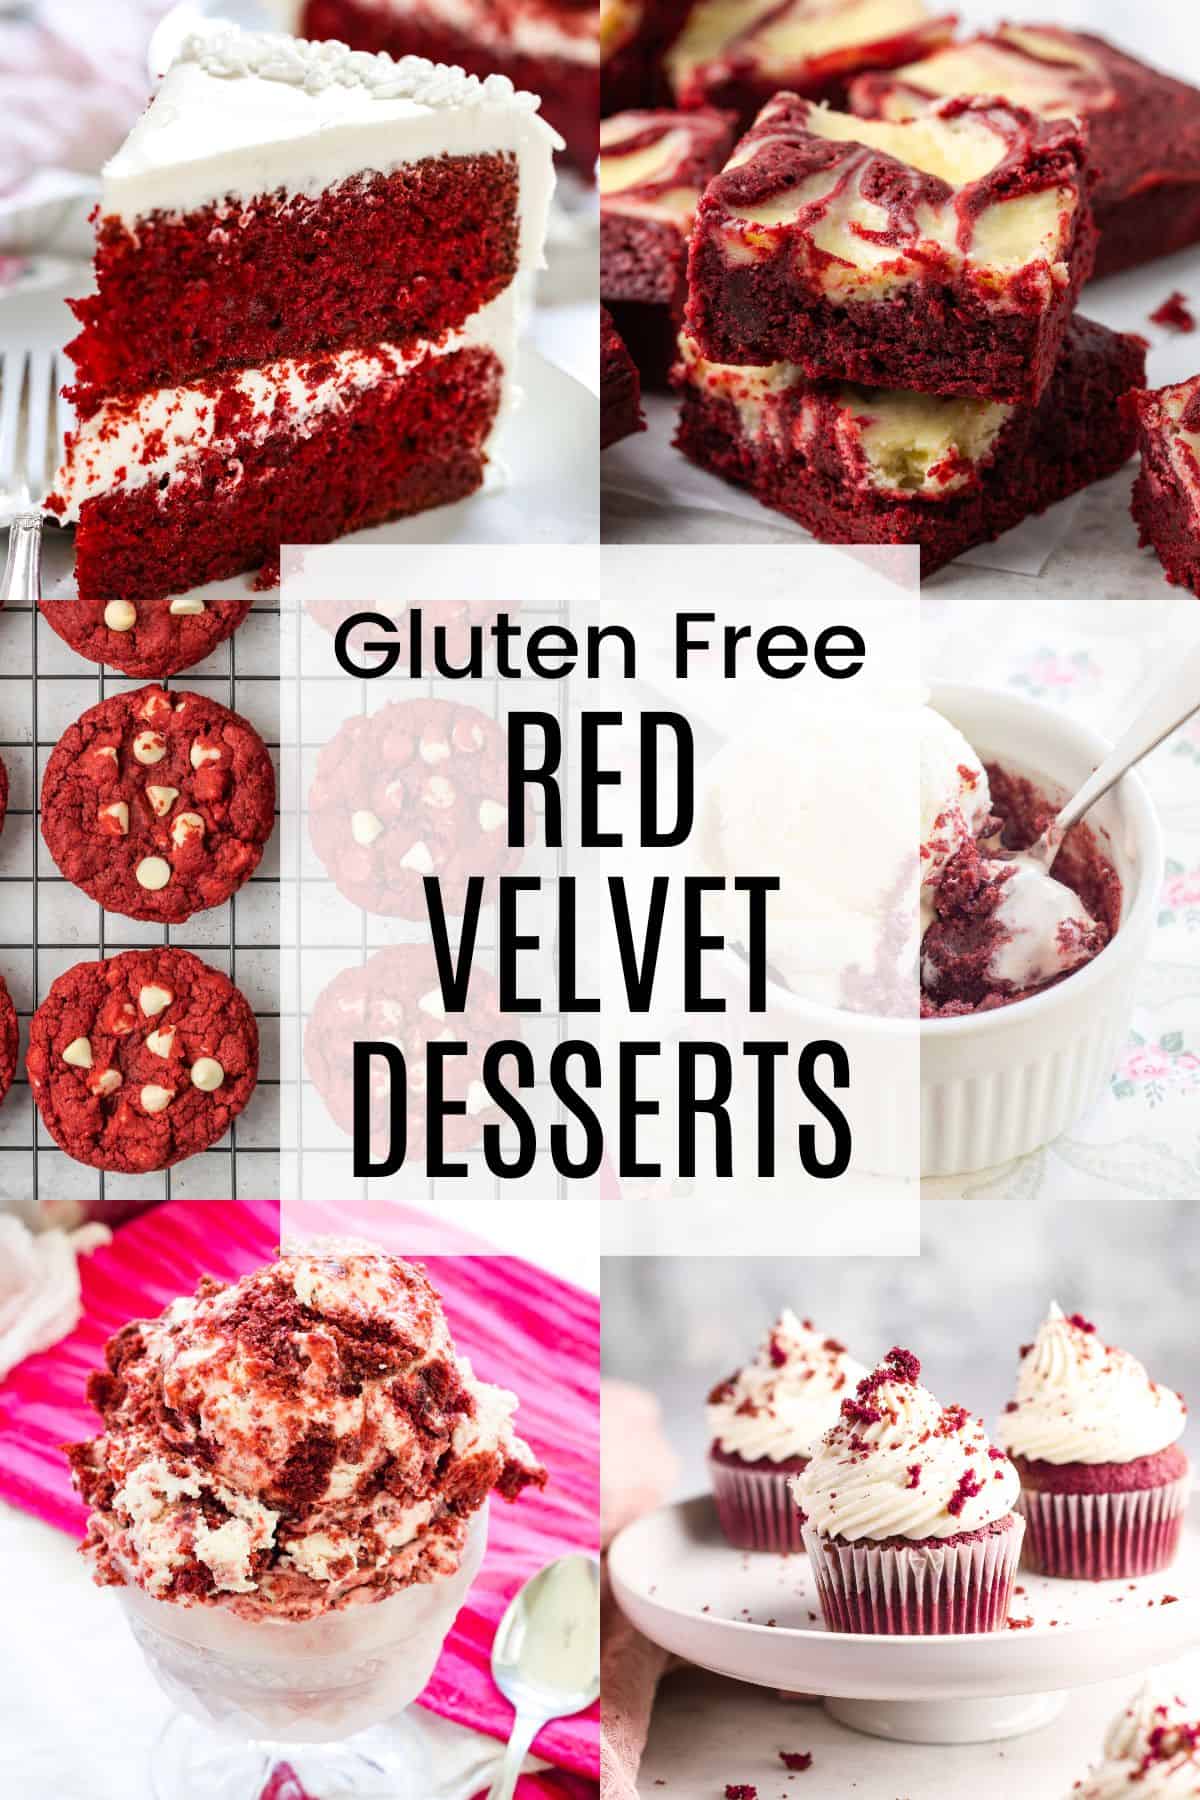 A two-by-three collage of a slice of red velvet cake, a rack of red velvet cookies, a dish of red velvet ice cream, a red velvet mug brownies, a tray of red velvet cupcakes, and a stack of two red velvet brownies with a white box in the middle with text overlay that says, "Gluten Free Red Velvet Desserts".